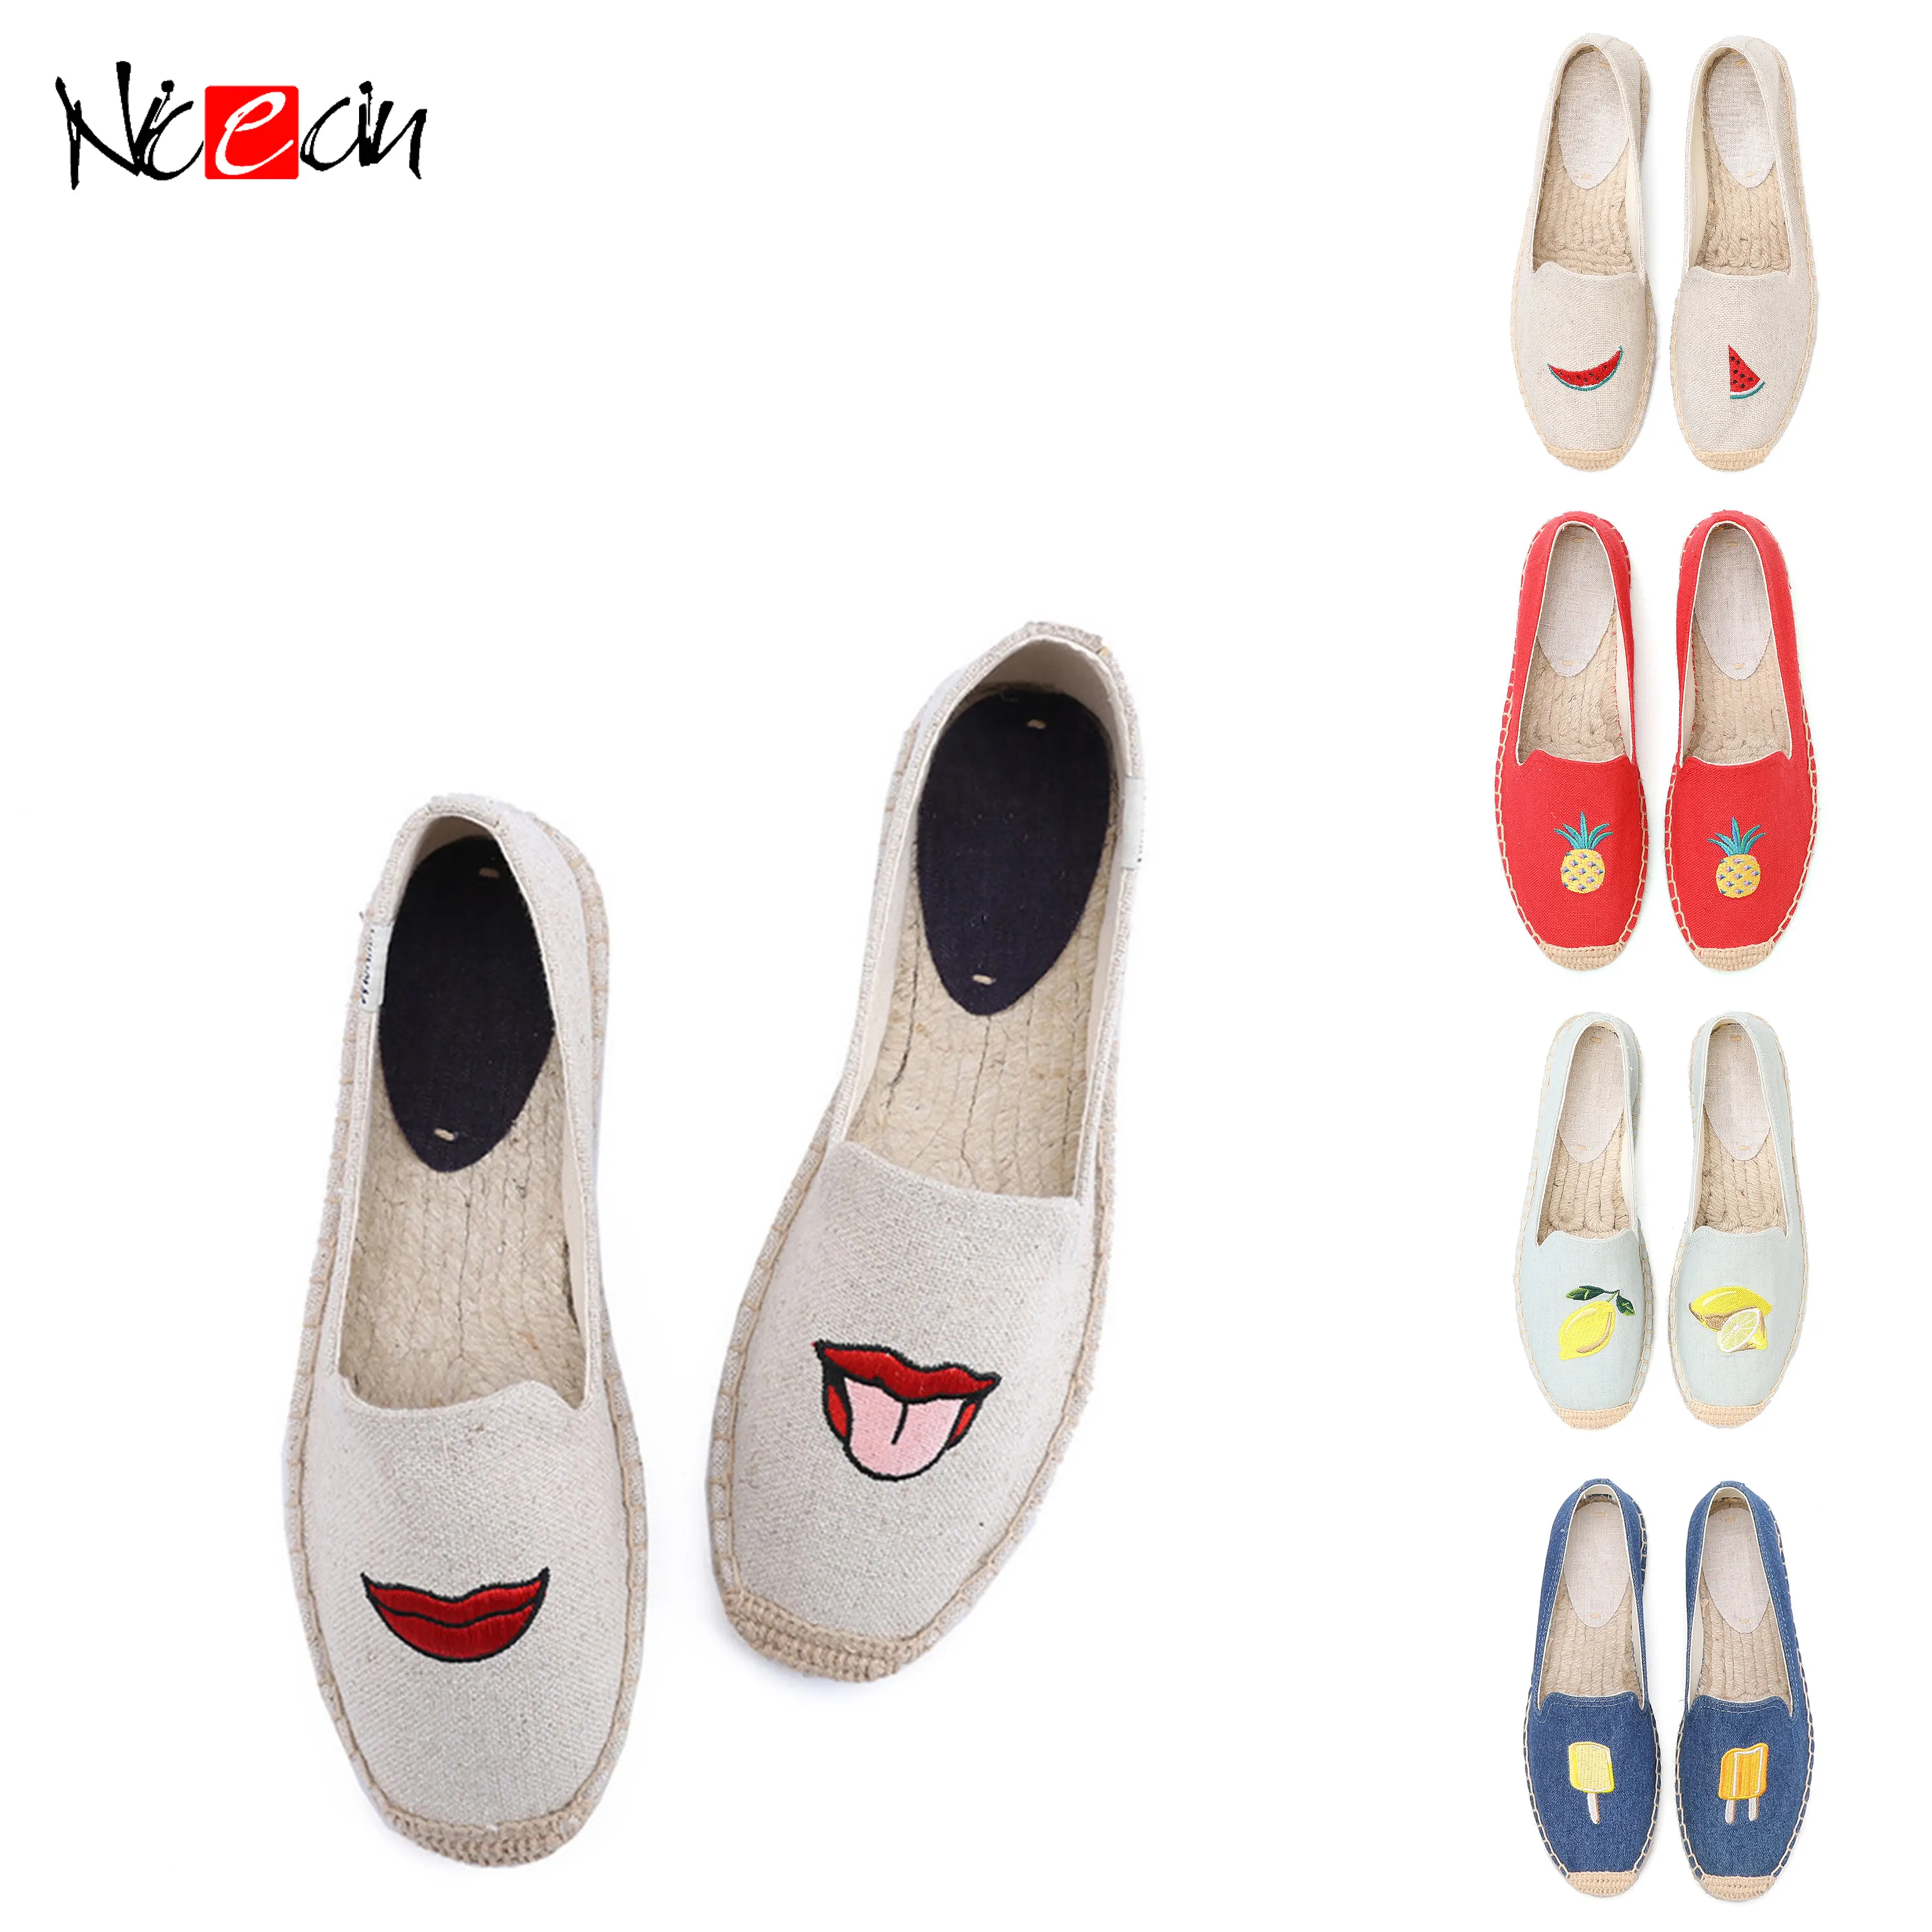 Hot Selling Embroidery Logo In upper Men's Casual Shoes Espadrilles Canvas Shoes For Ladies And Men